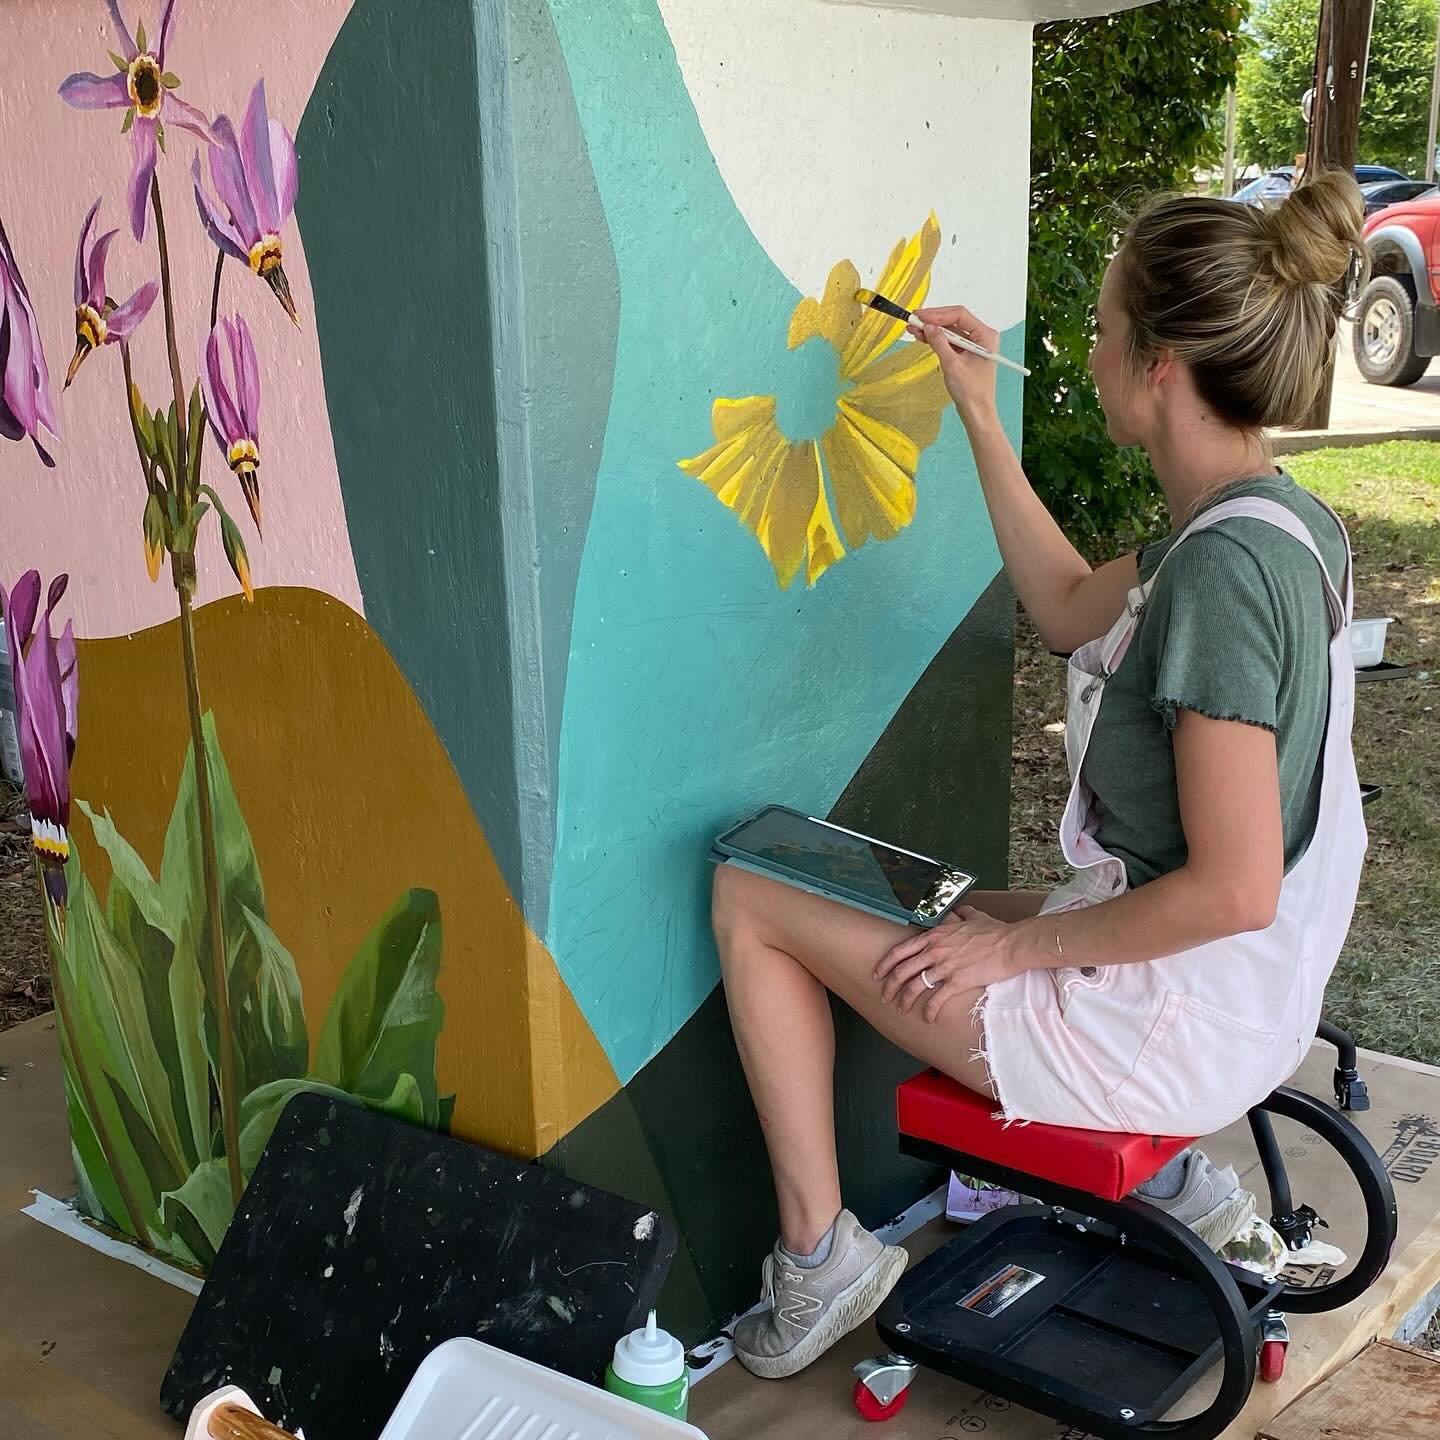 🎉The mural is looking AMAZING! Check out the link in our bio to donate to our mural project. 

The Northaven Trail Pedestrian Bridge Mural Project is funded in part by Lyda Hill Philanthropies. 

#northaventrail #nativeplants #publicart #dallas